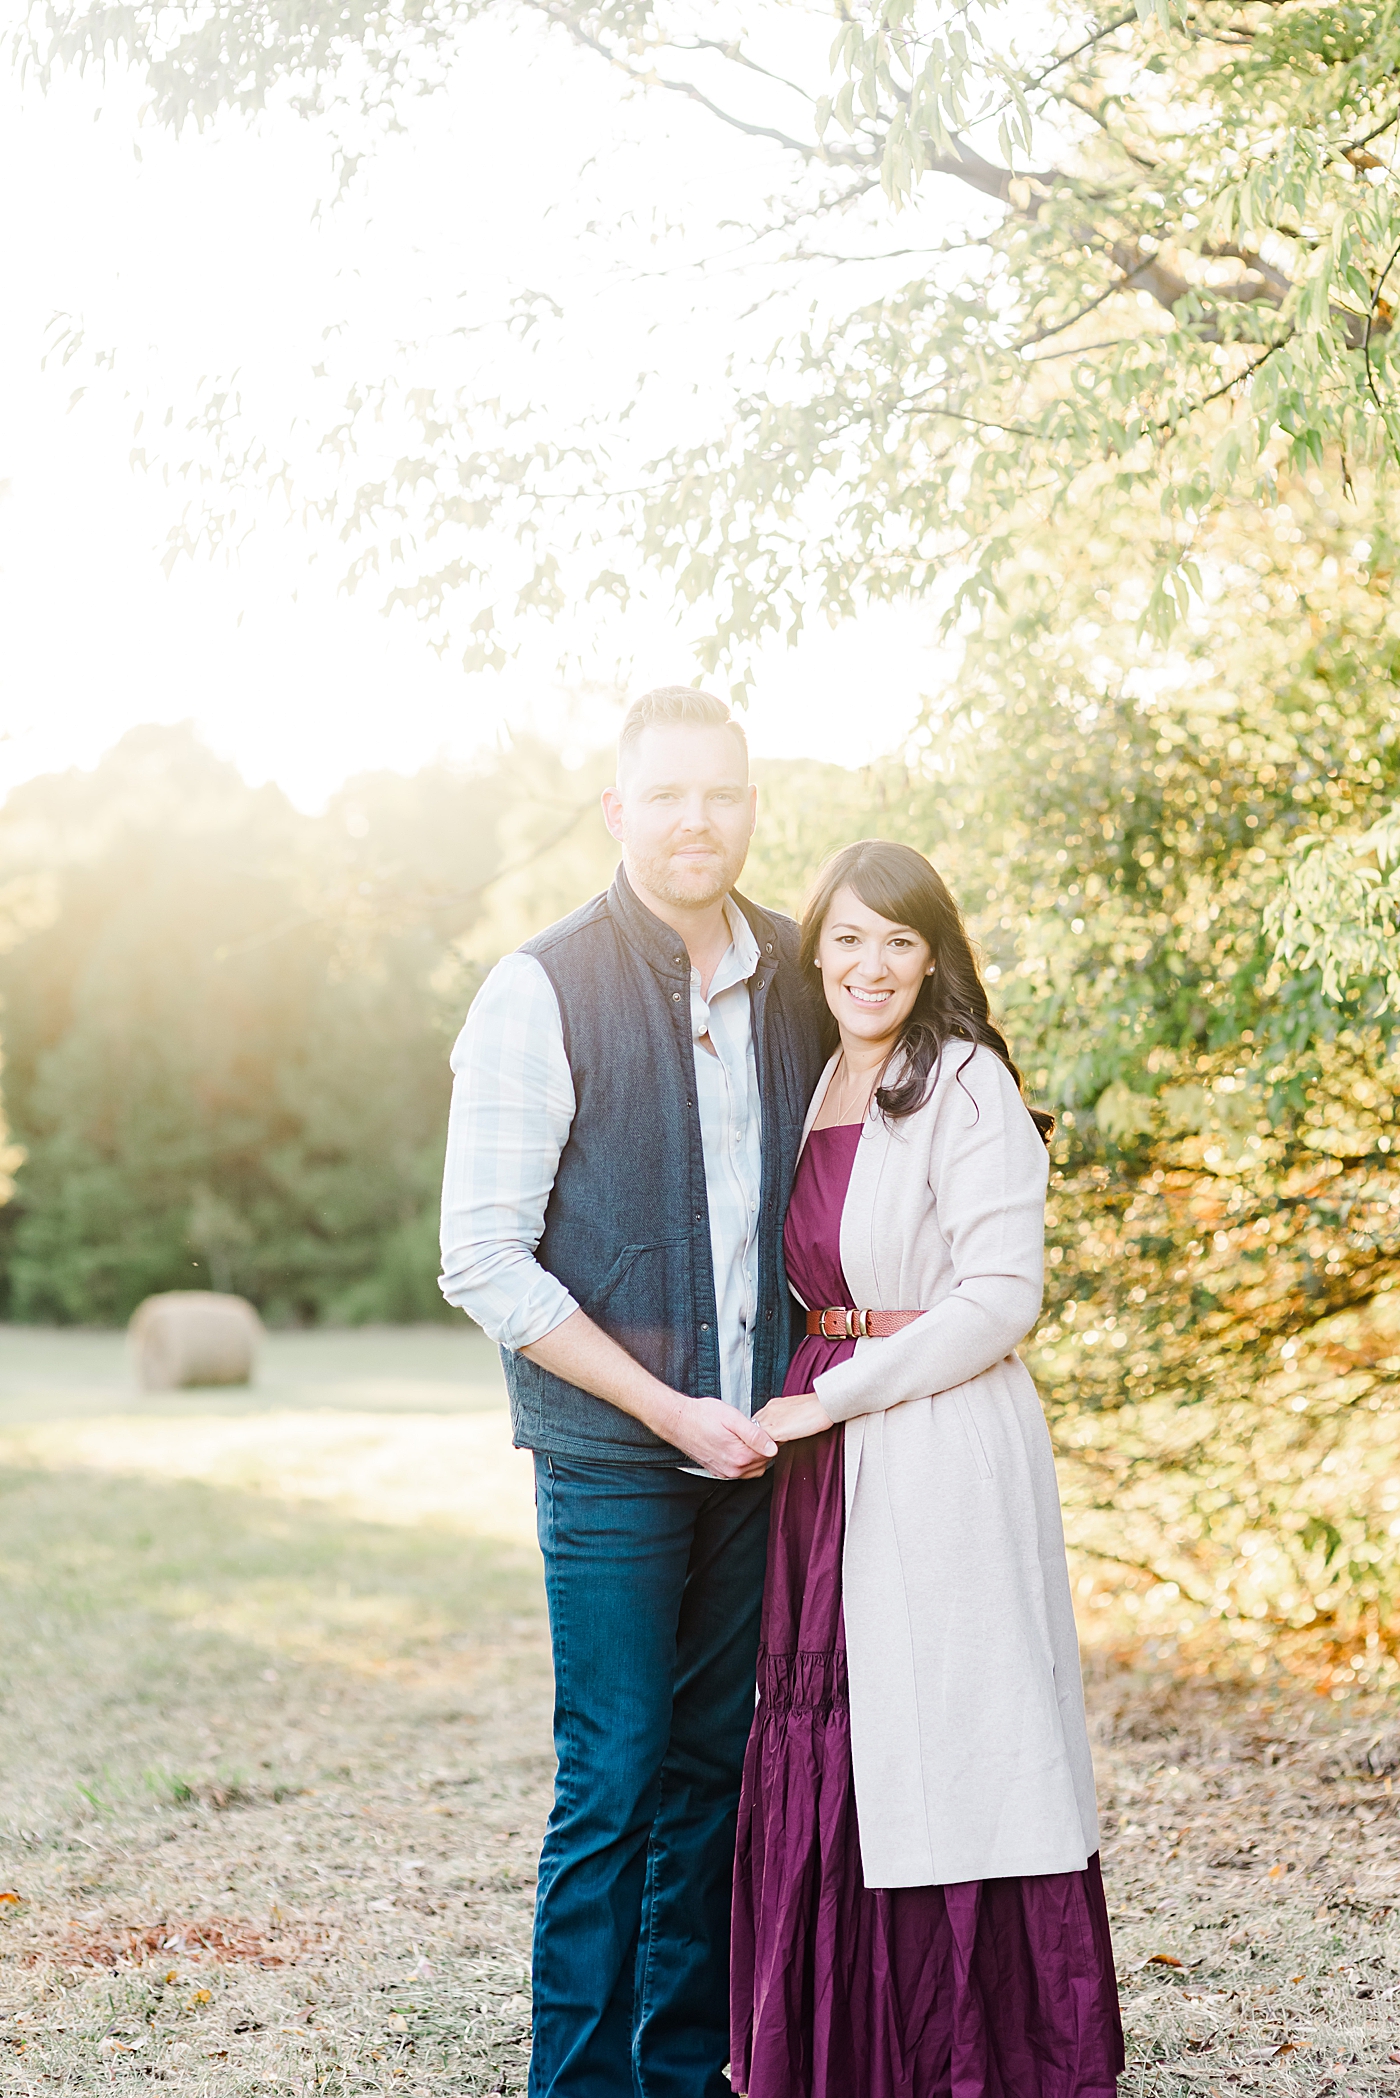 Mom and dad smiling holding hands | Photo by Davidson Milestone Photographer Anna Wisjo